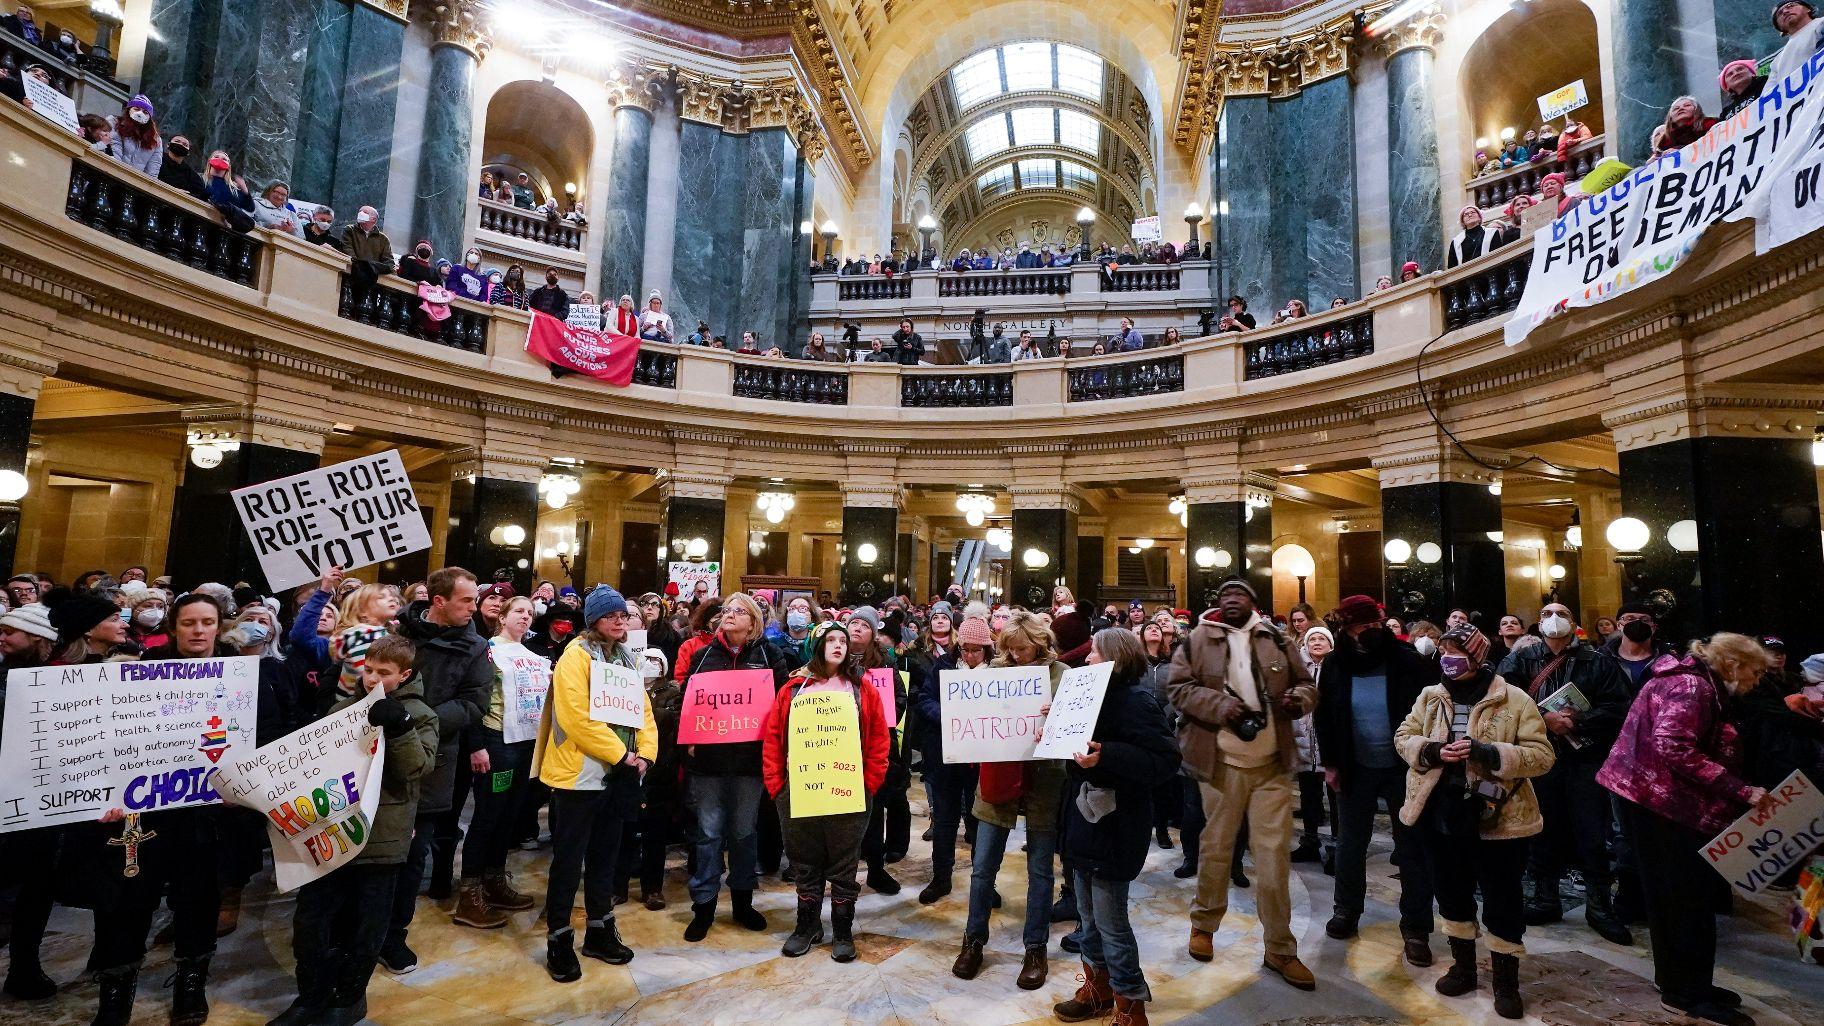 Protesters are seen in the Wisconsin Capitol Rotunda during a march supporting overturning Wisconsin’s near total ban on abortion, Jan. 22, 2023, in Madison, Wis. (AP Photo / Morry Gash)